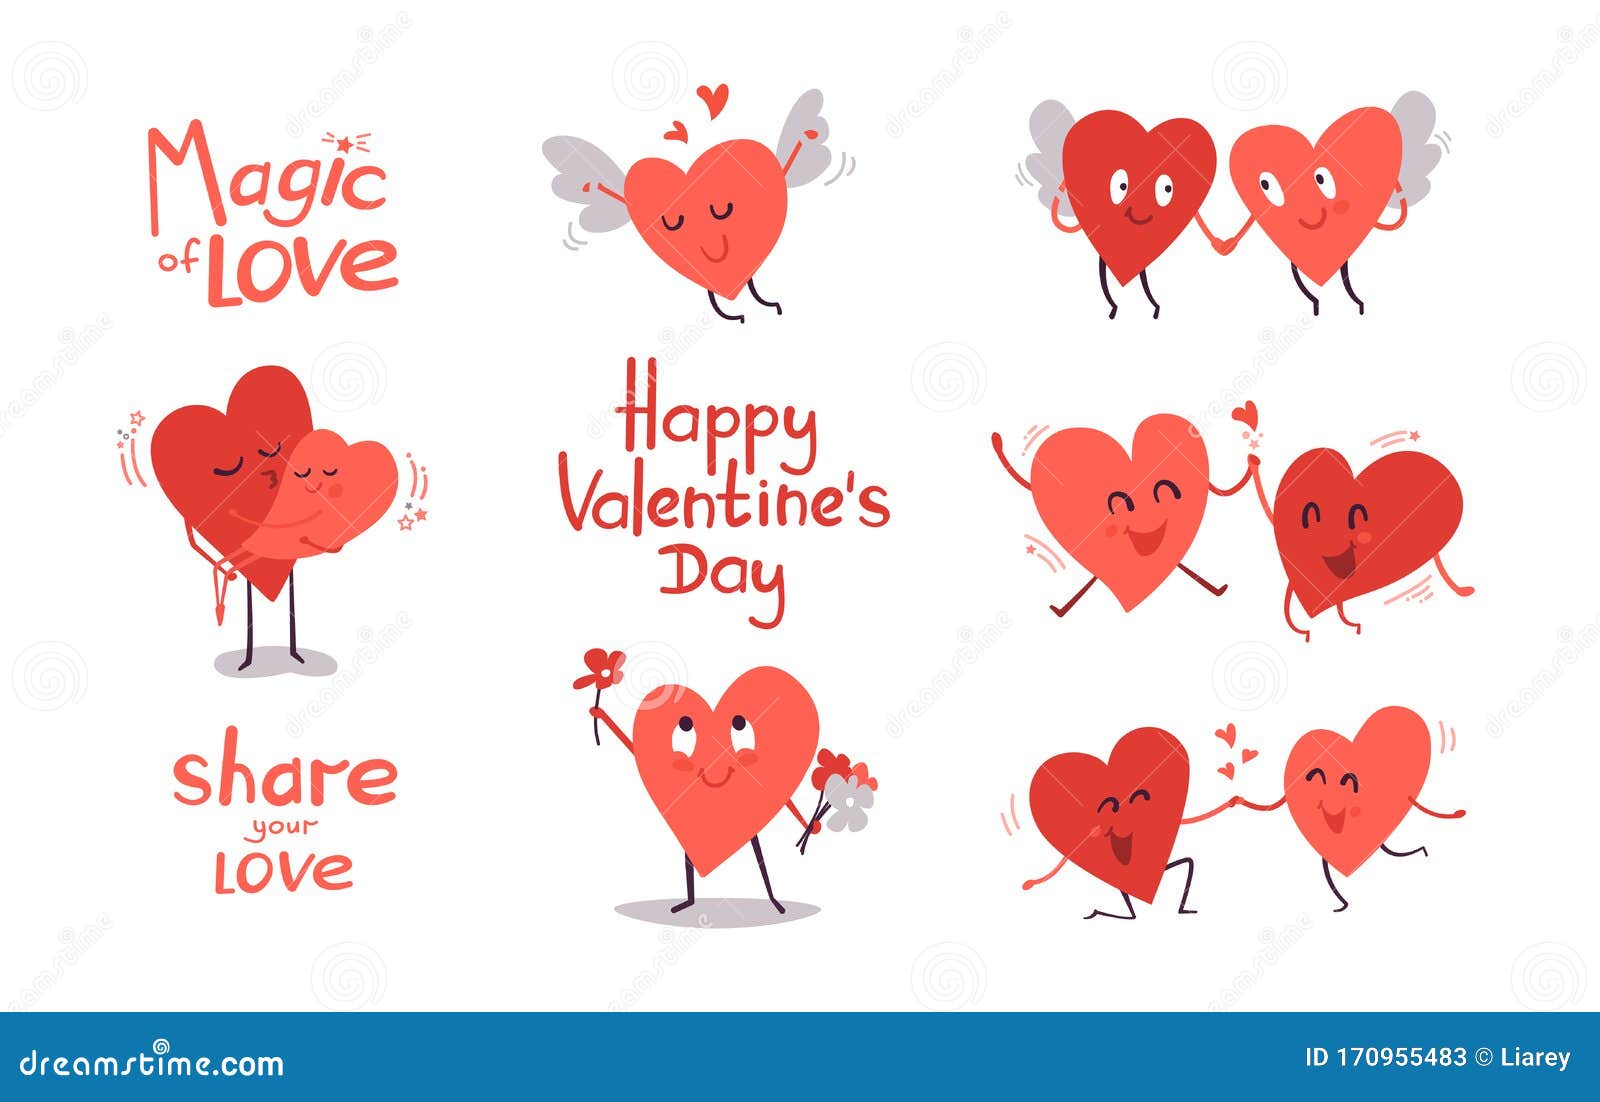 Happy Valentines Day. Set of Cute Vector Illustrations Isolated on White. Clip Art for Greeting Card Concept Stock Vector - Illustration of amour, lover: 170955483